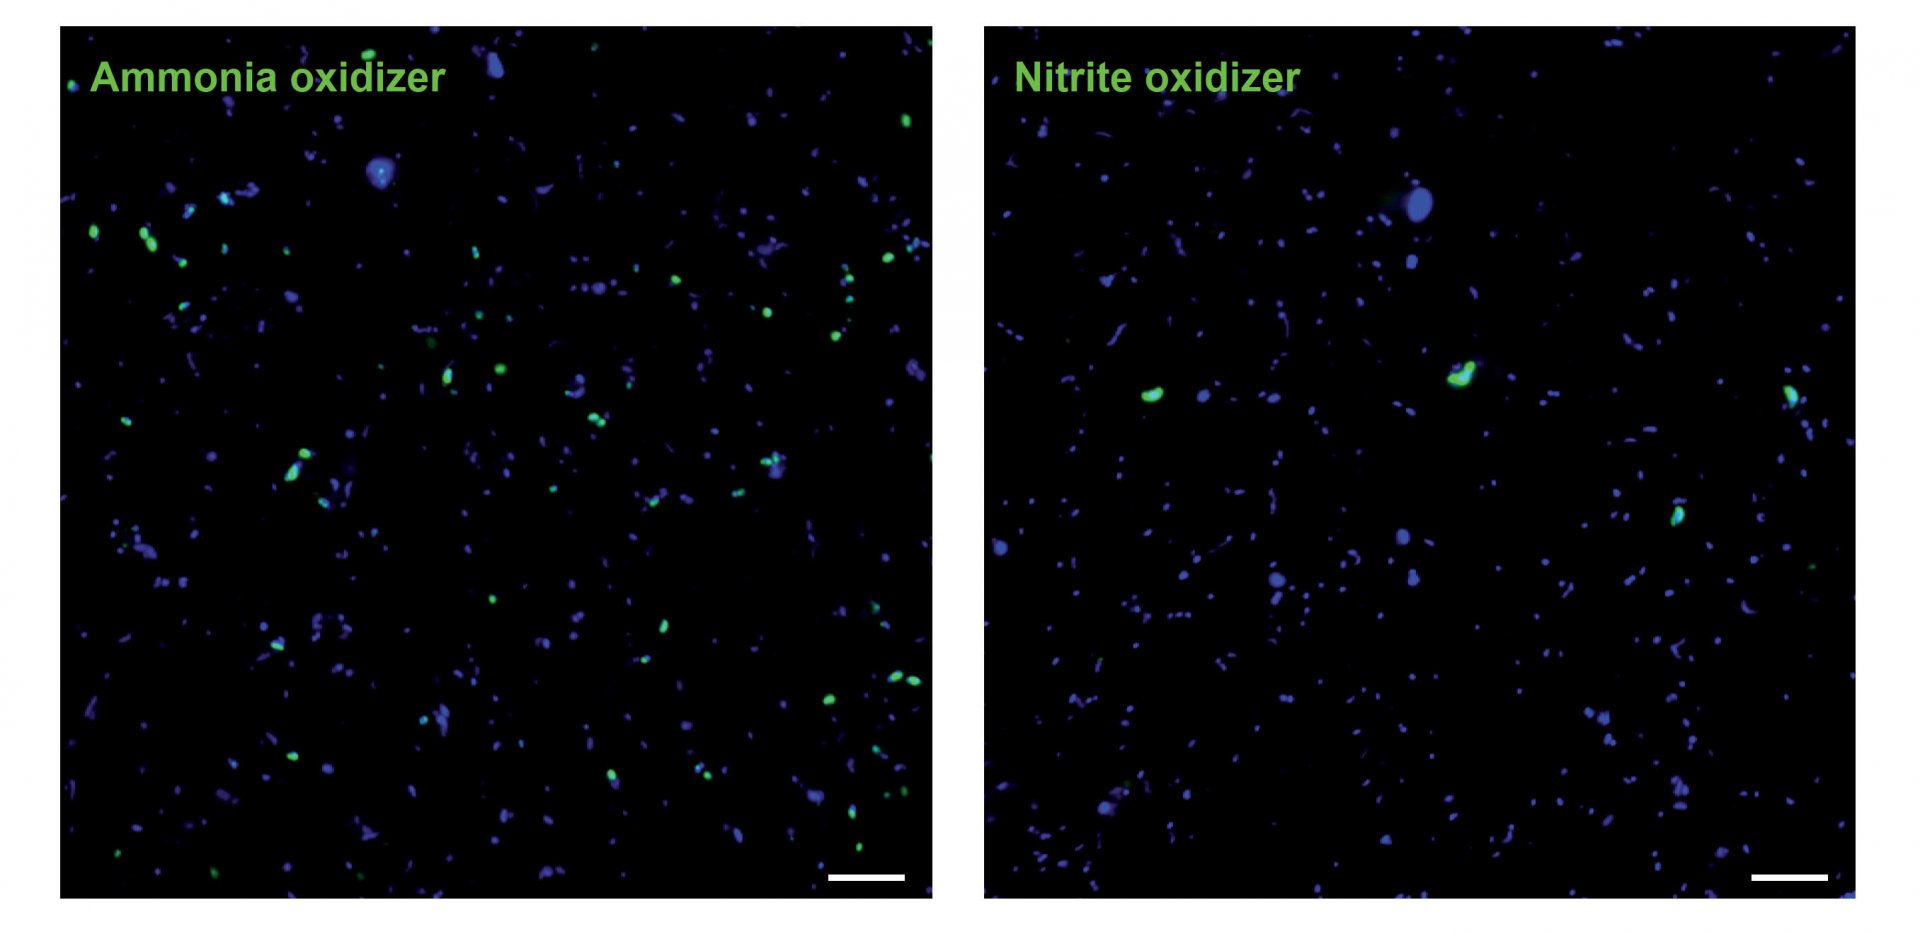 Pictures of ammonia-oxidizing Archaea and nitrite-oxidizing Nitrospinae: The picture on the left shows the abundance of ammonia-oxidizing Archaea (green) and other microorganisms (blue). The picture on the right shows the abundance of nitrite-oxidizing Nitrospinae (green) and other microorganisms (blue). The differences in abundance and size are clearly visible. (© Max Planck Institute for Marine Microbiology/ K. Kitzinger)